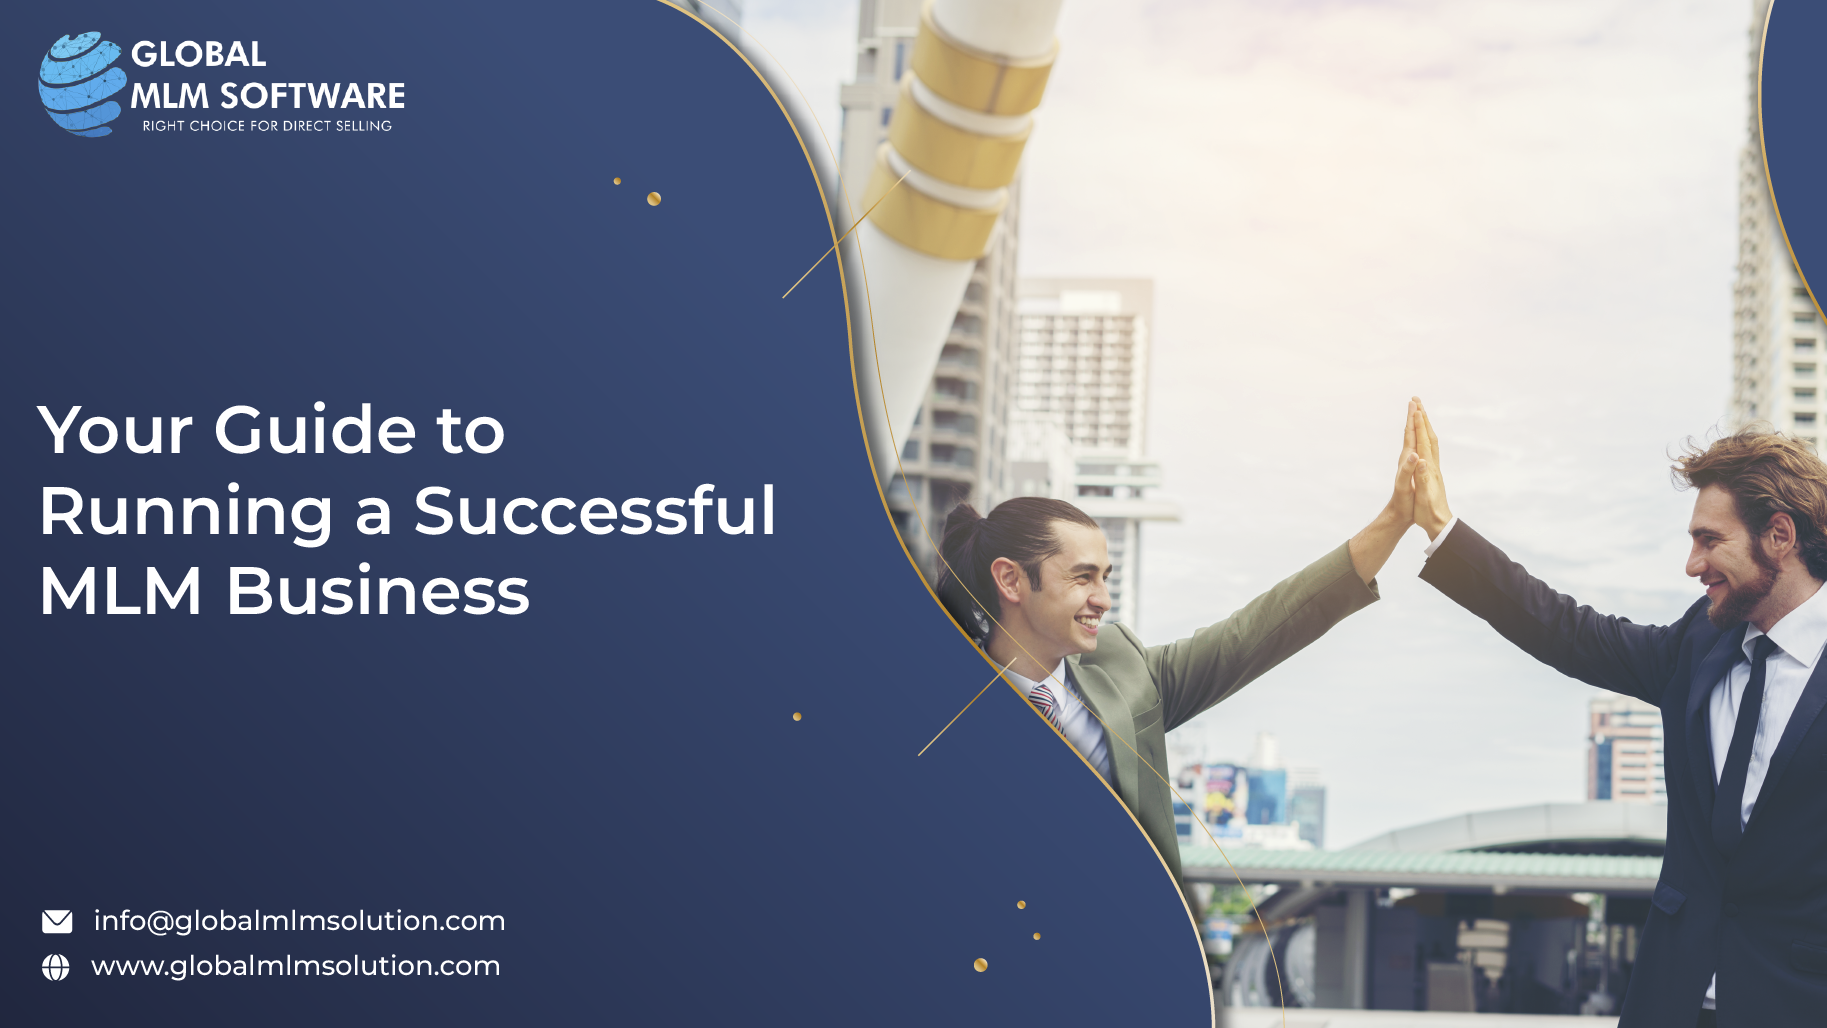 From Launch to Prosperity: Your Full Guide to Running an MLM Business